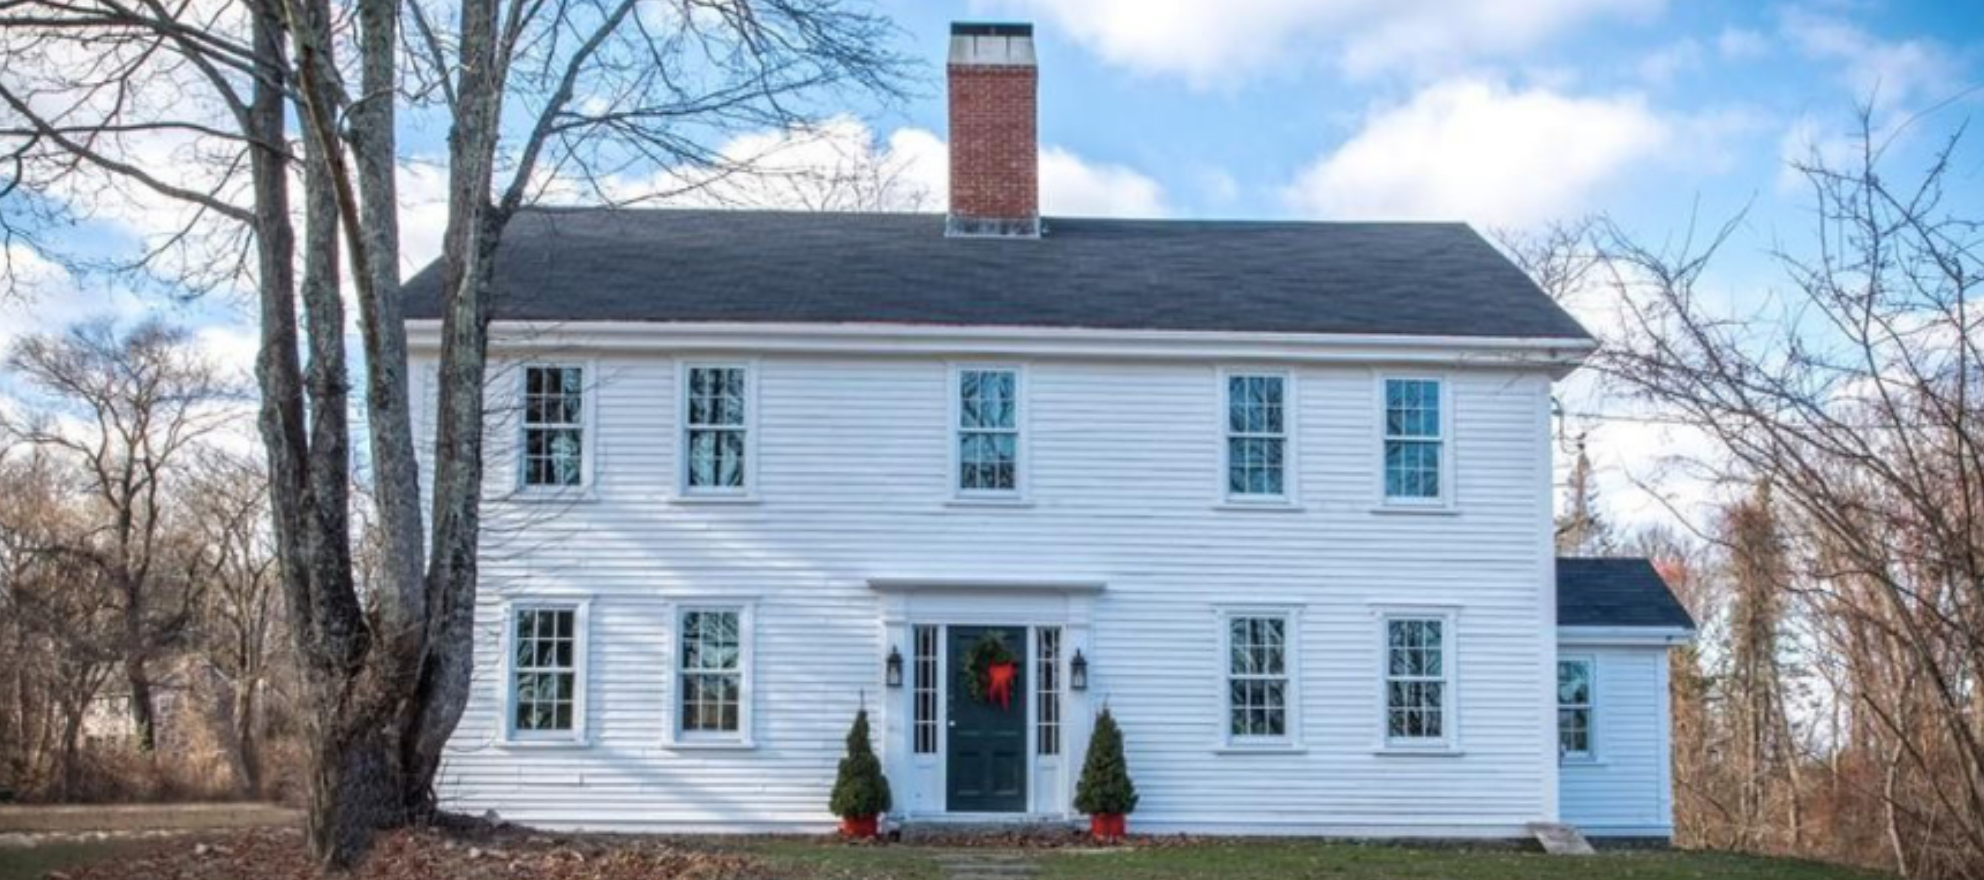 A Salem witch trials home finds new life 325 years later